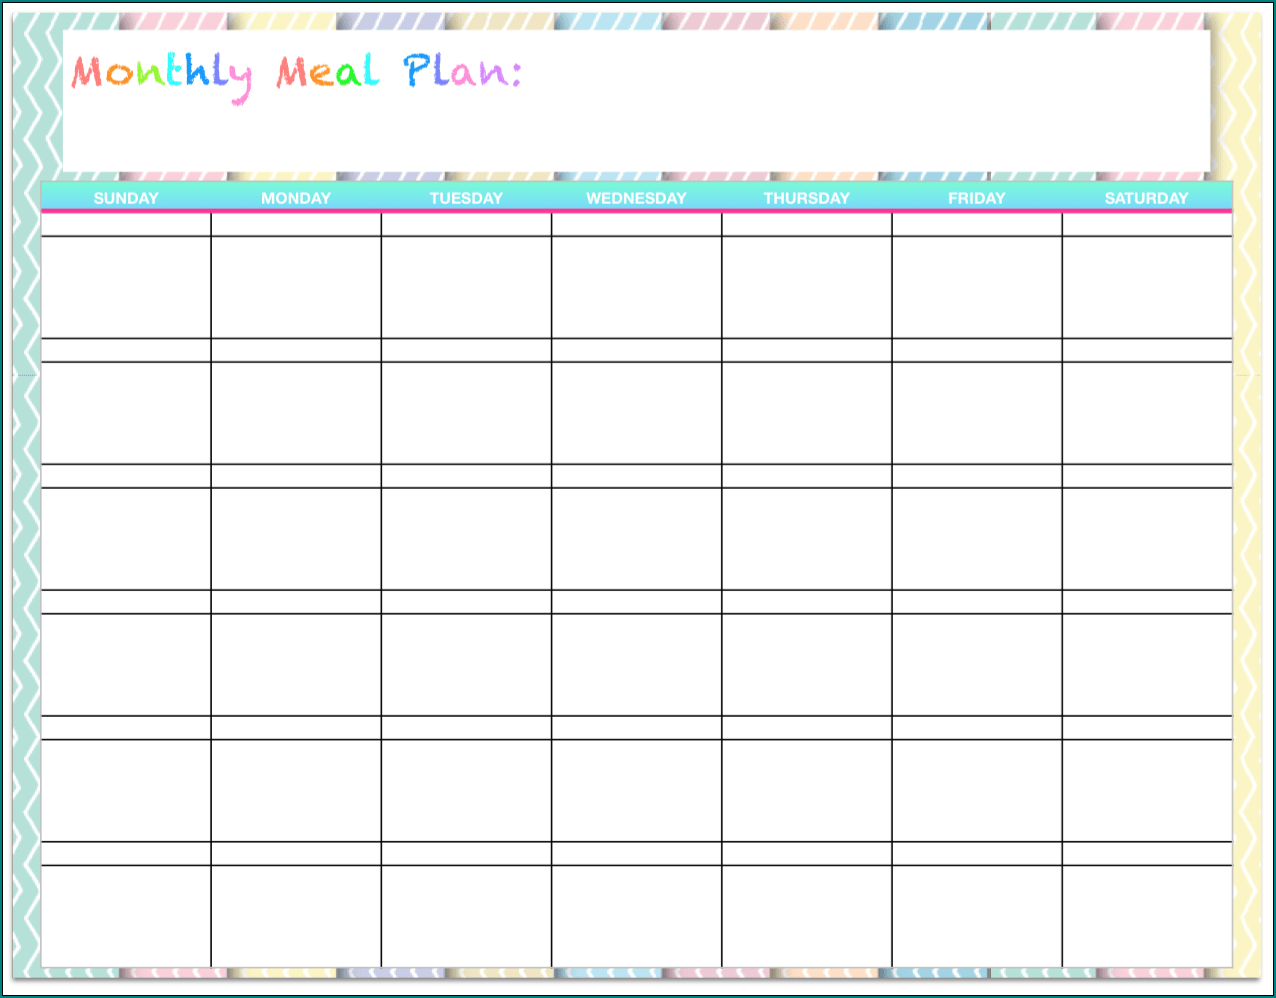 Example of Monthly Meal Planner Template